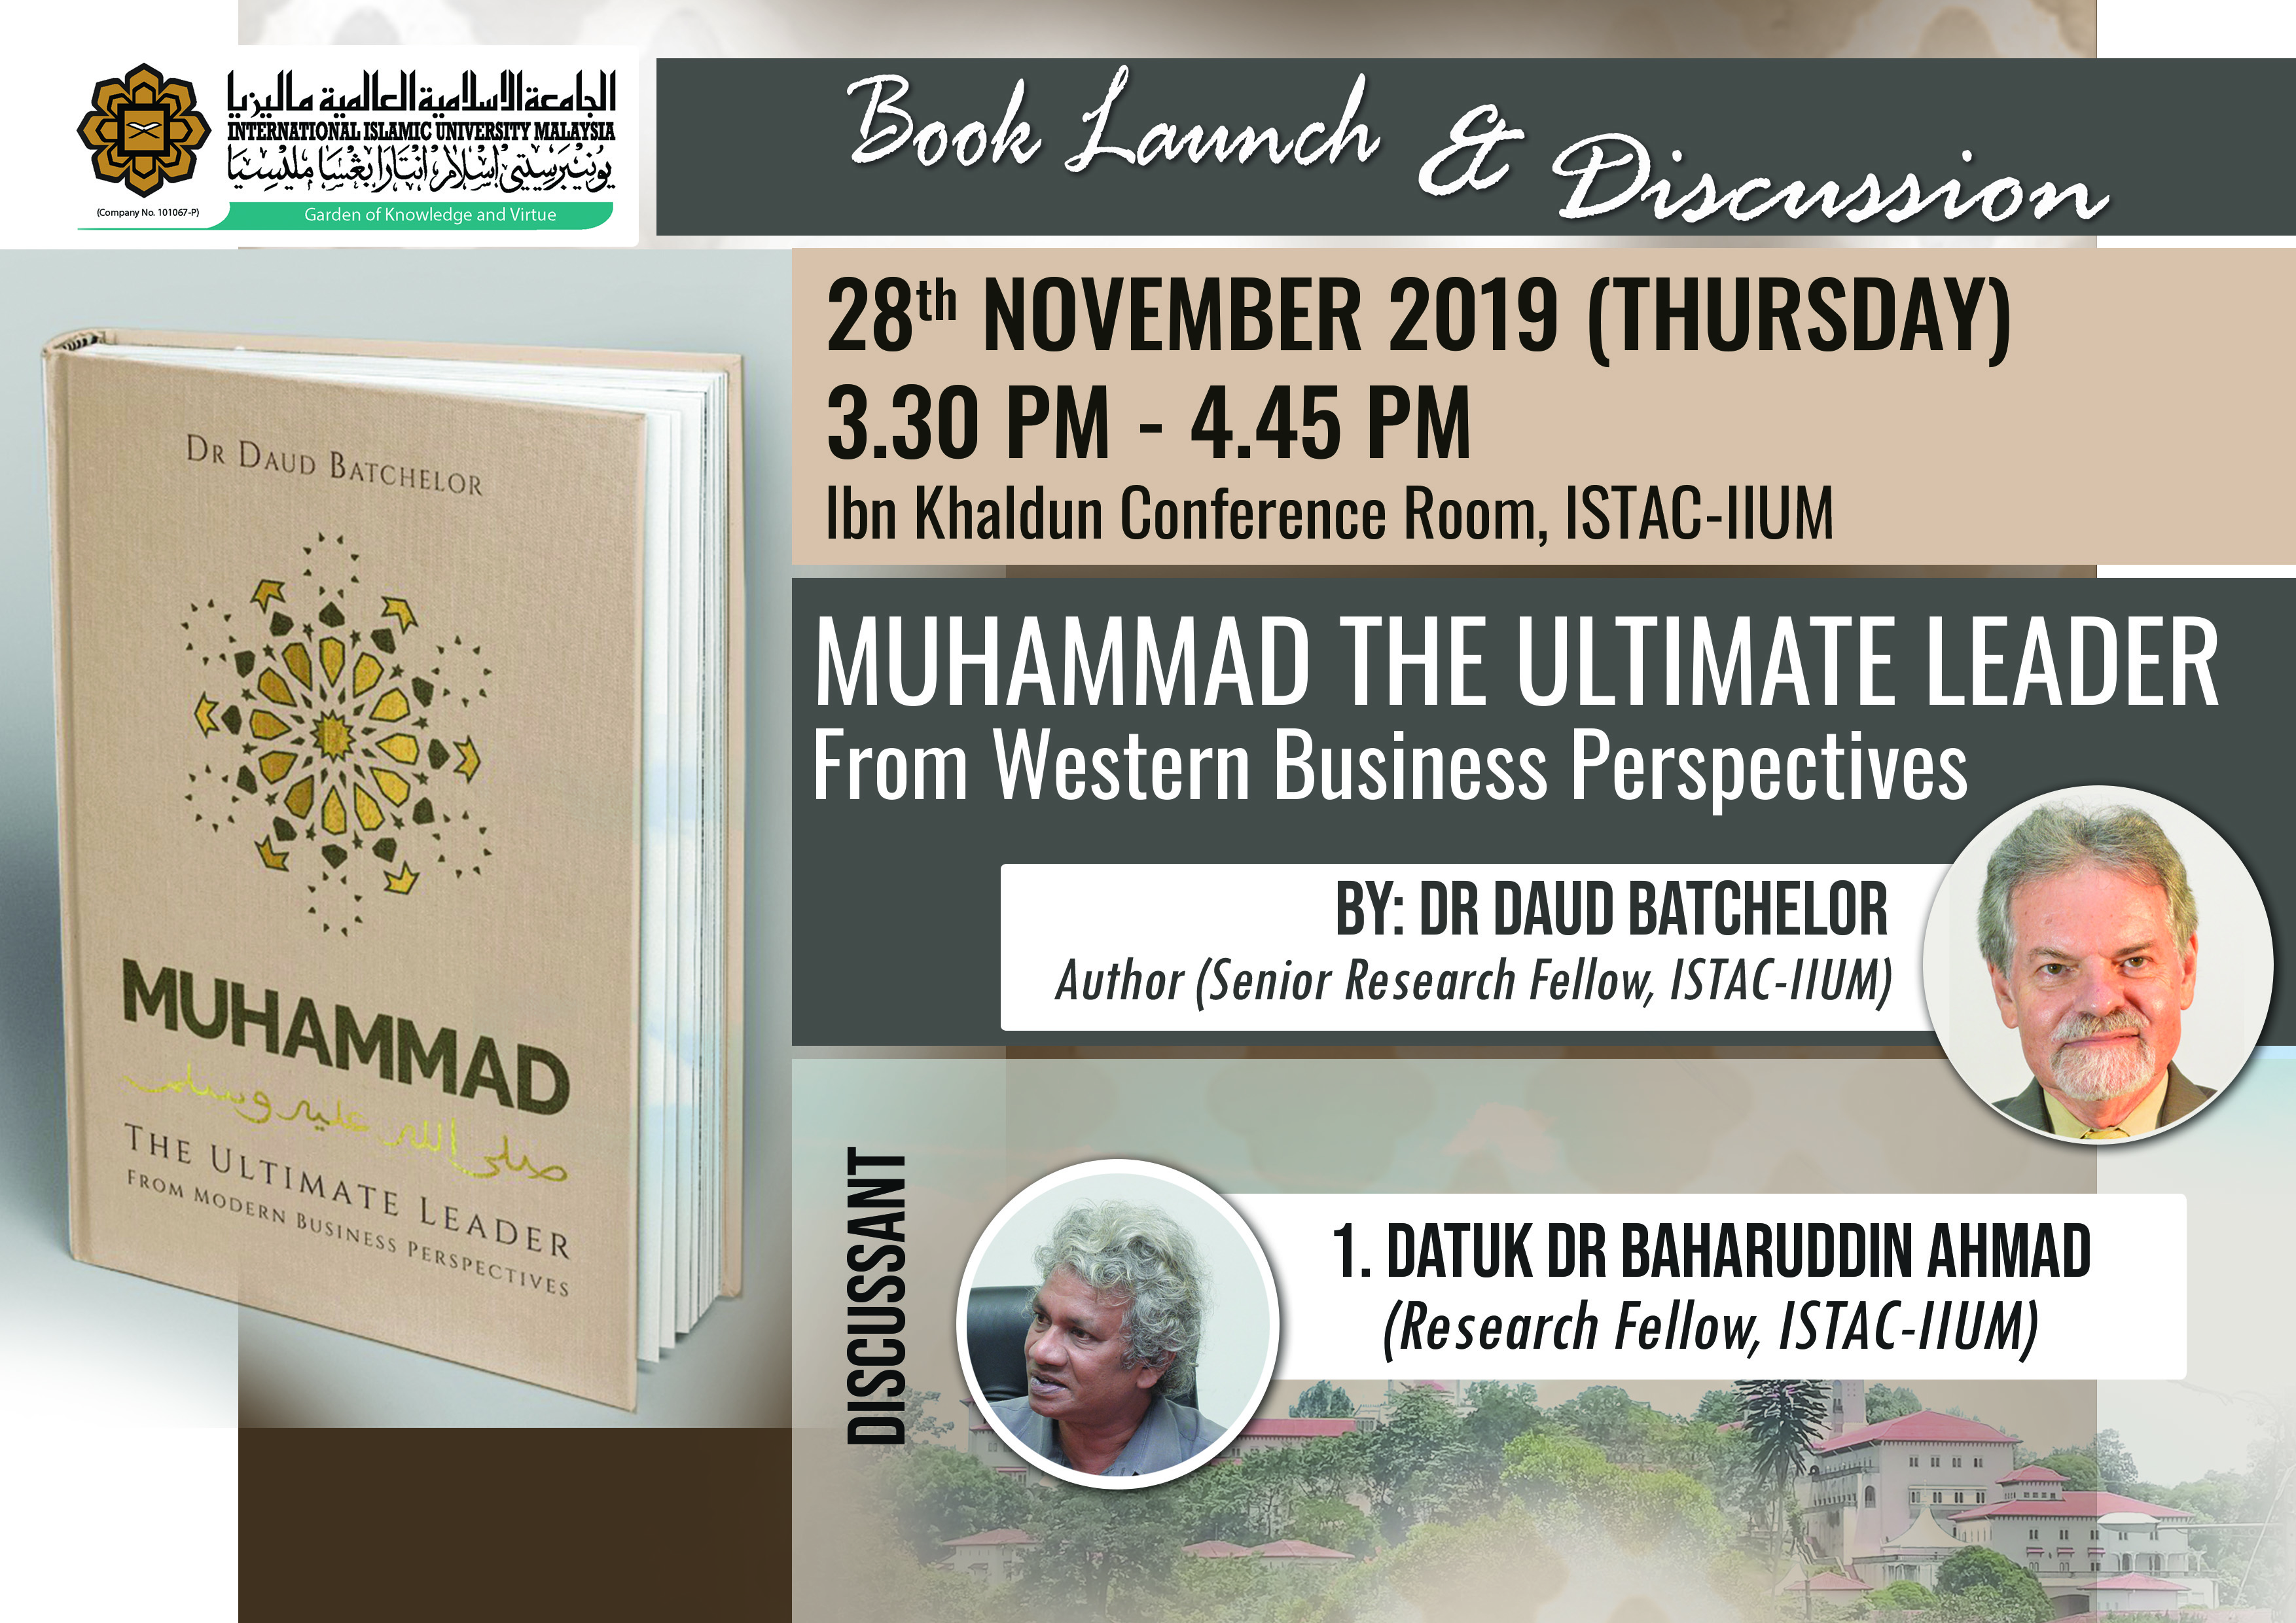 BOOK LAUNCH AND DISCUSSION - MUHAMMAD THE ULTIMATE LEADER From Western Business Perspectives